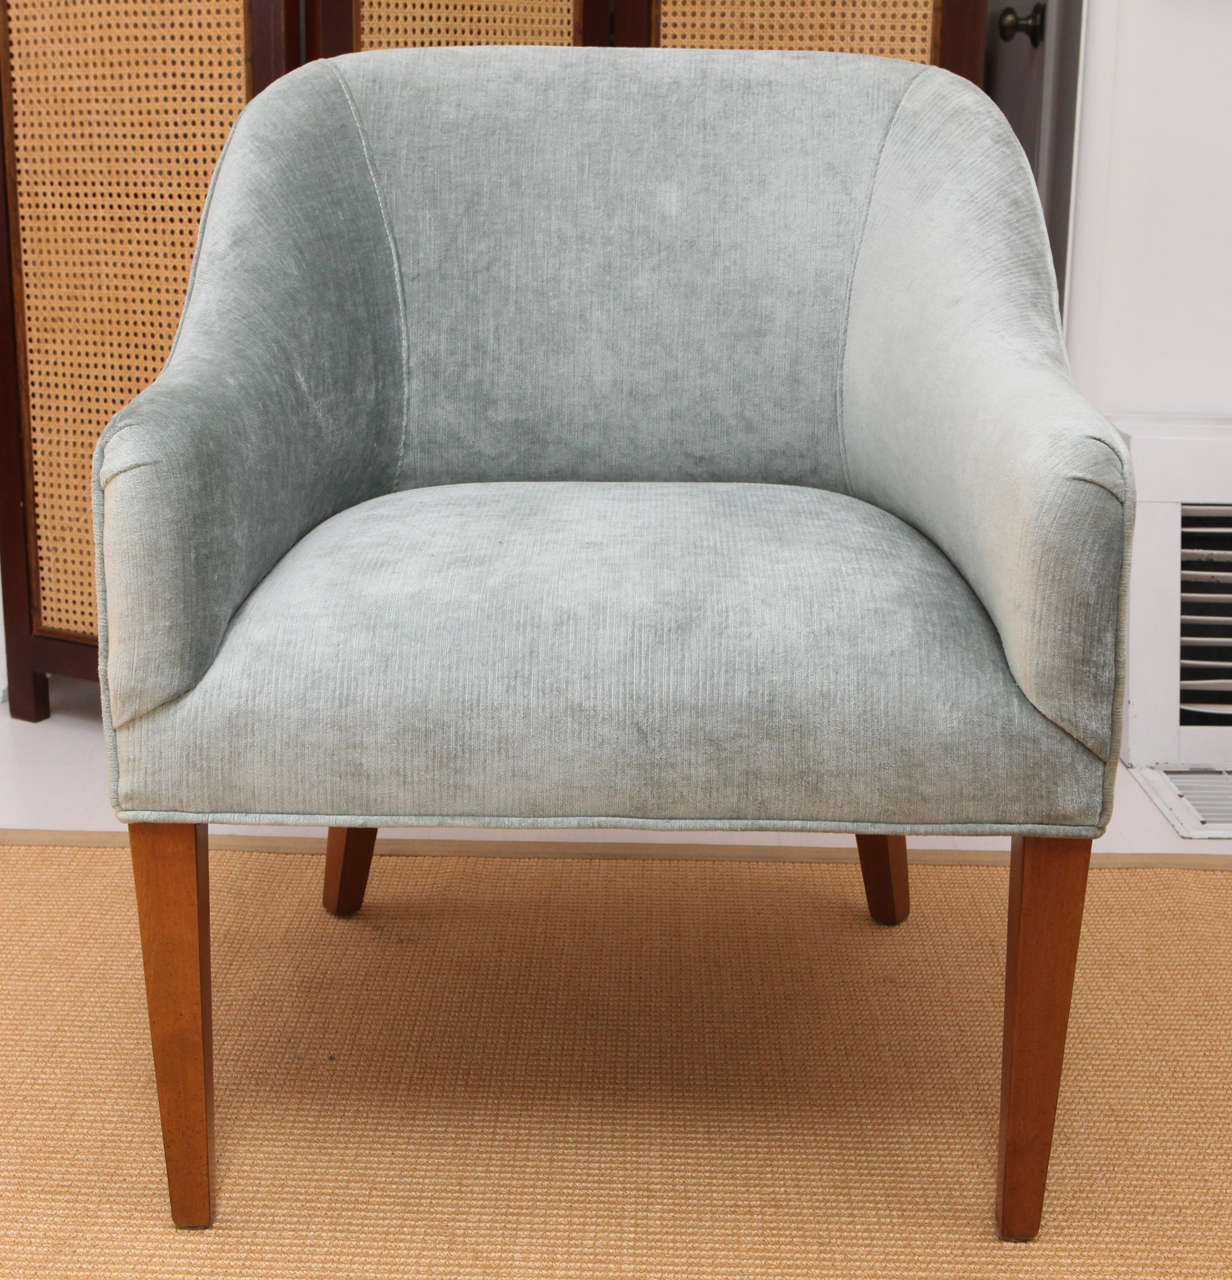 Beautiful light blue velvet chairs. Perfect for living room or end chairs for a dining table.